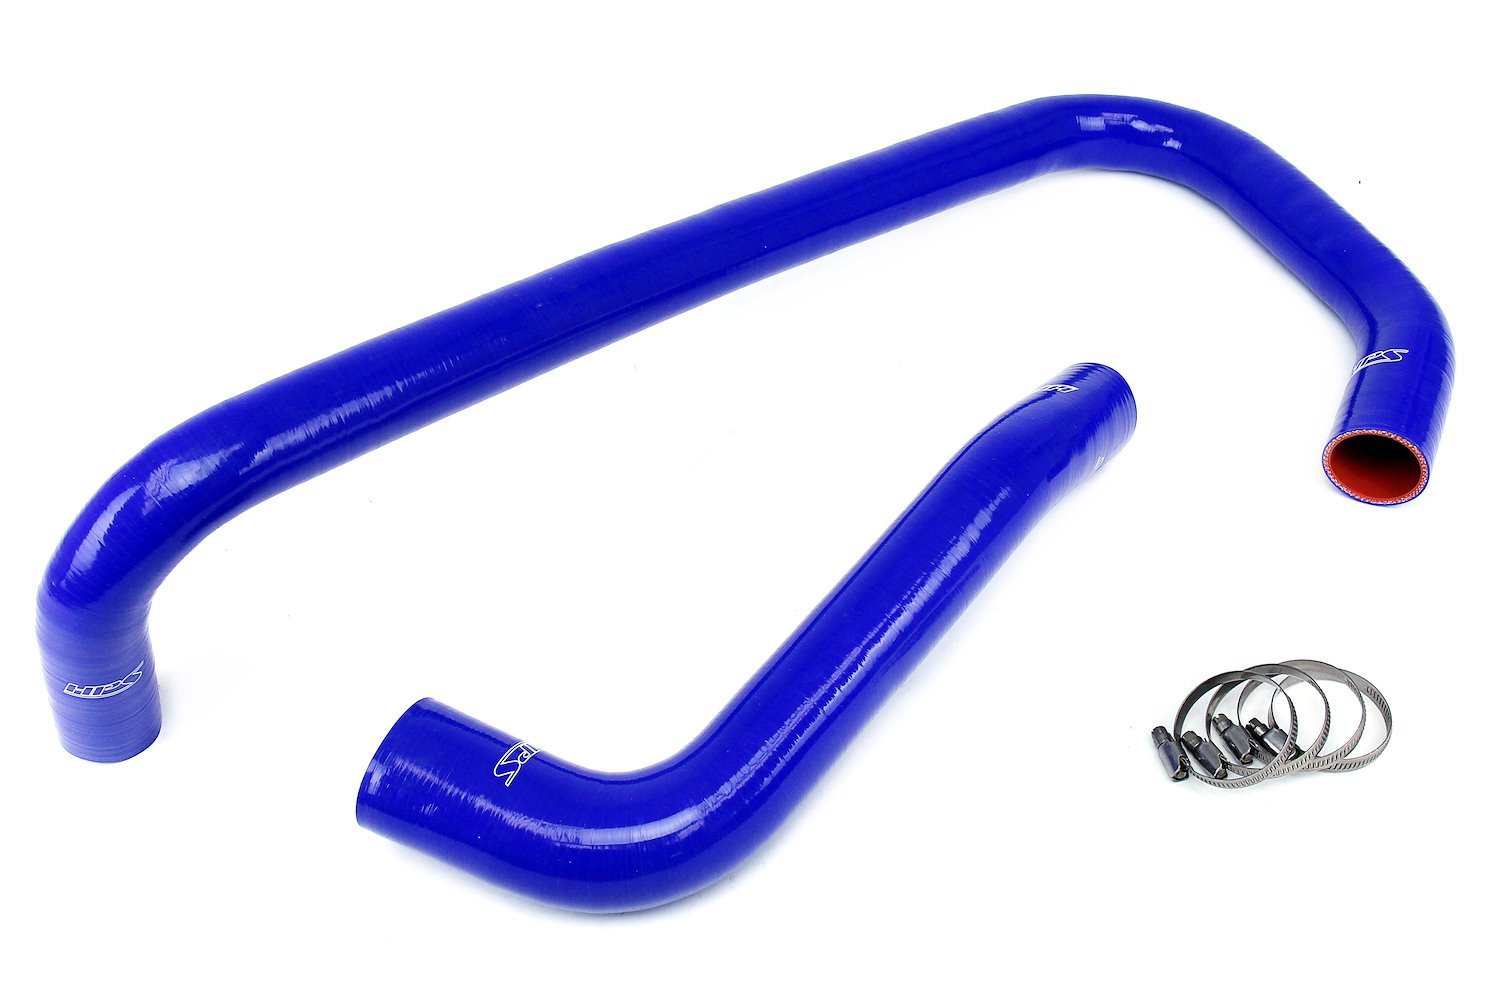 57-1818-BLUE Radiator Hose Kit, 3-Ply Reinforced Silicone, Replaces Rubber Radiator Coolant Hoses